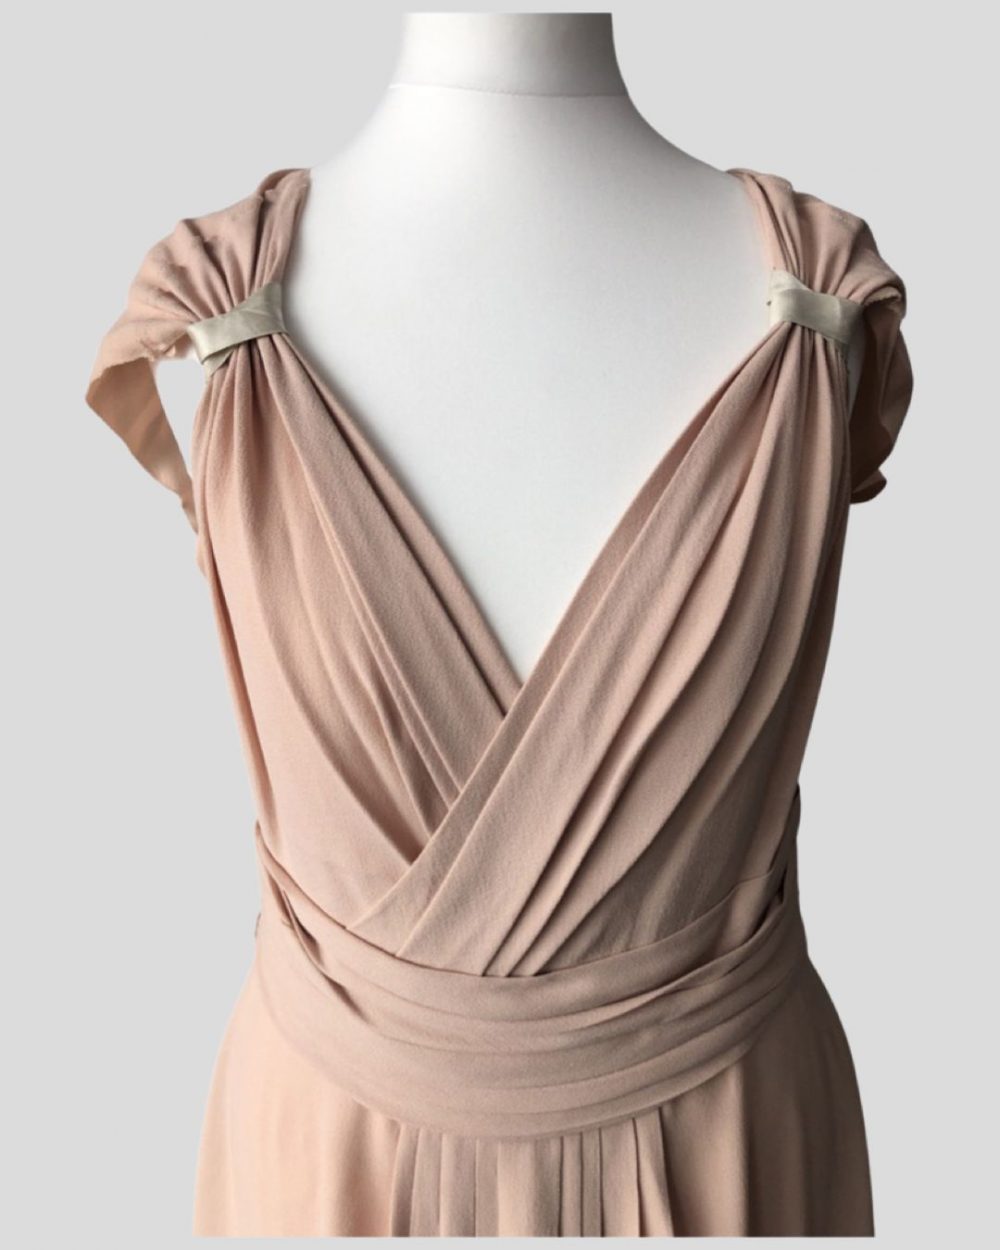 PALE-PINK-DRESS-WITH-PLEATS-ONROTATE